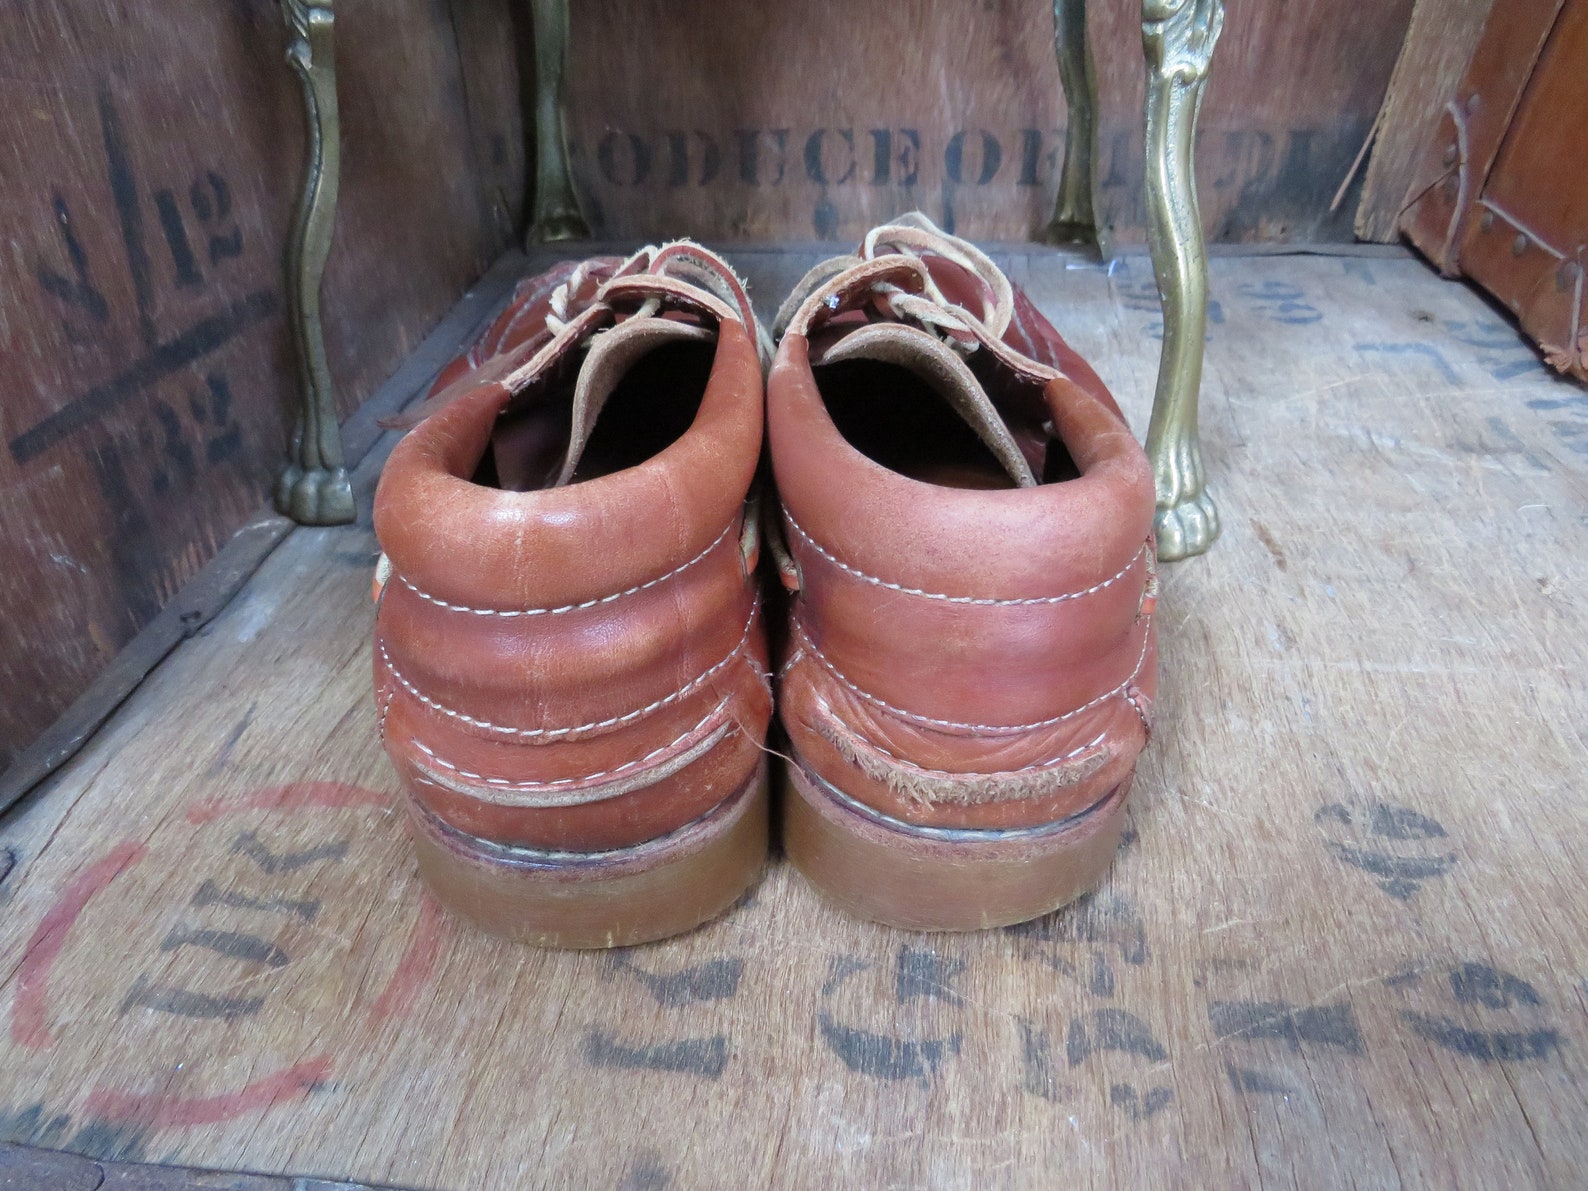 Vintage Kickers Shoes Kickers Shoes Kickers Boat Shoes - Etsy